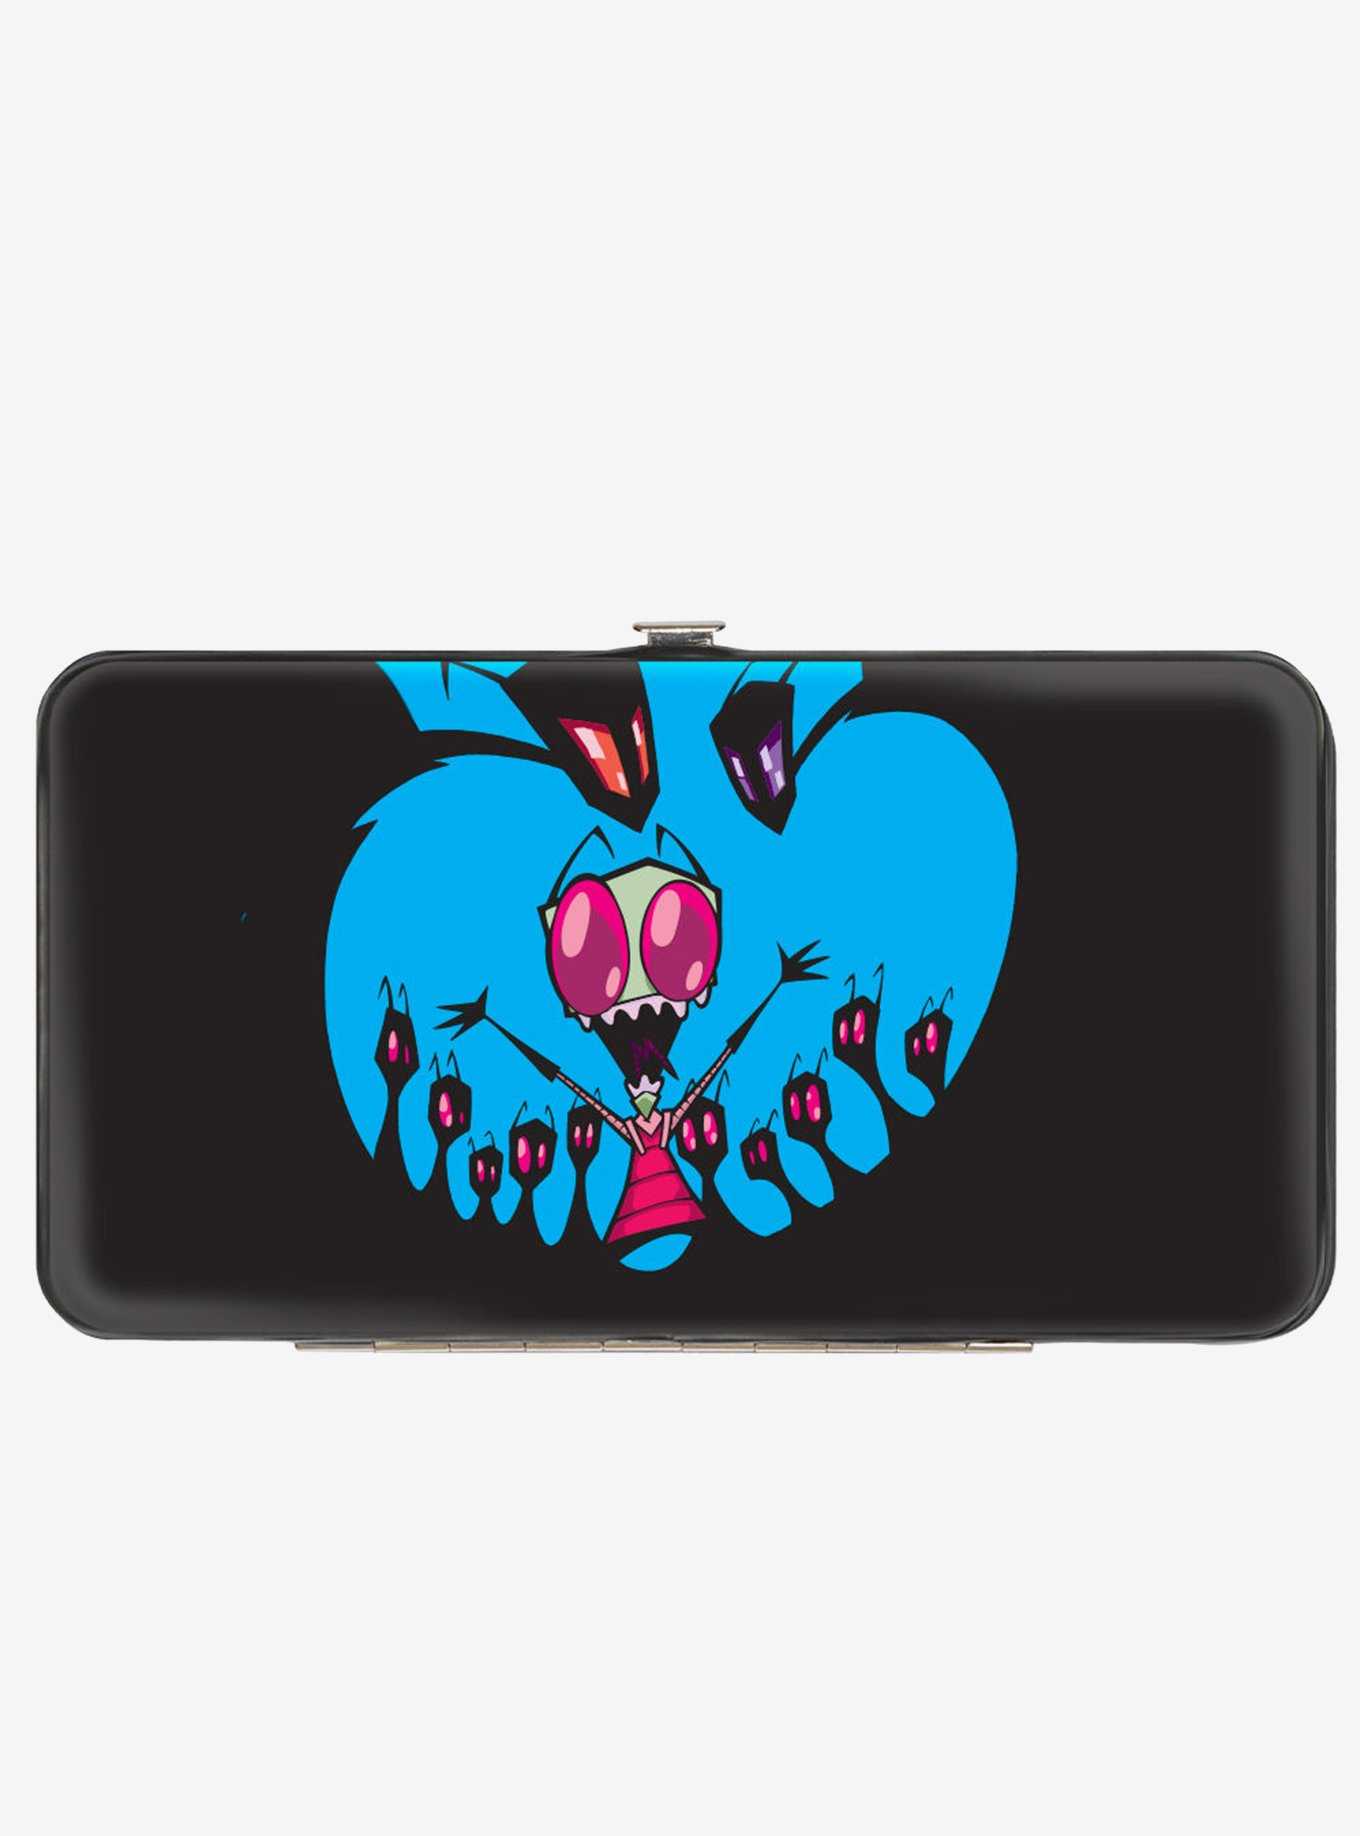 Invader Zim and GIR Alien Life Pose With Aliens Hinged Wallet, , hi-res